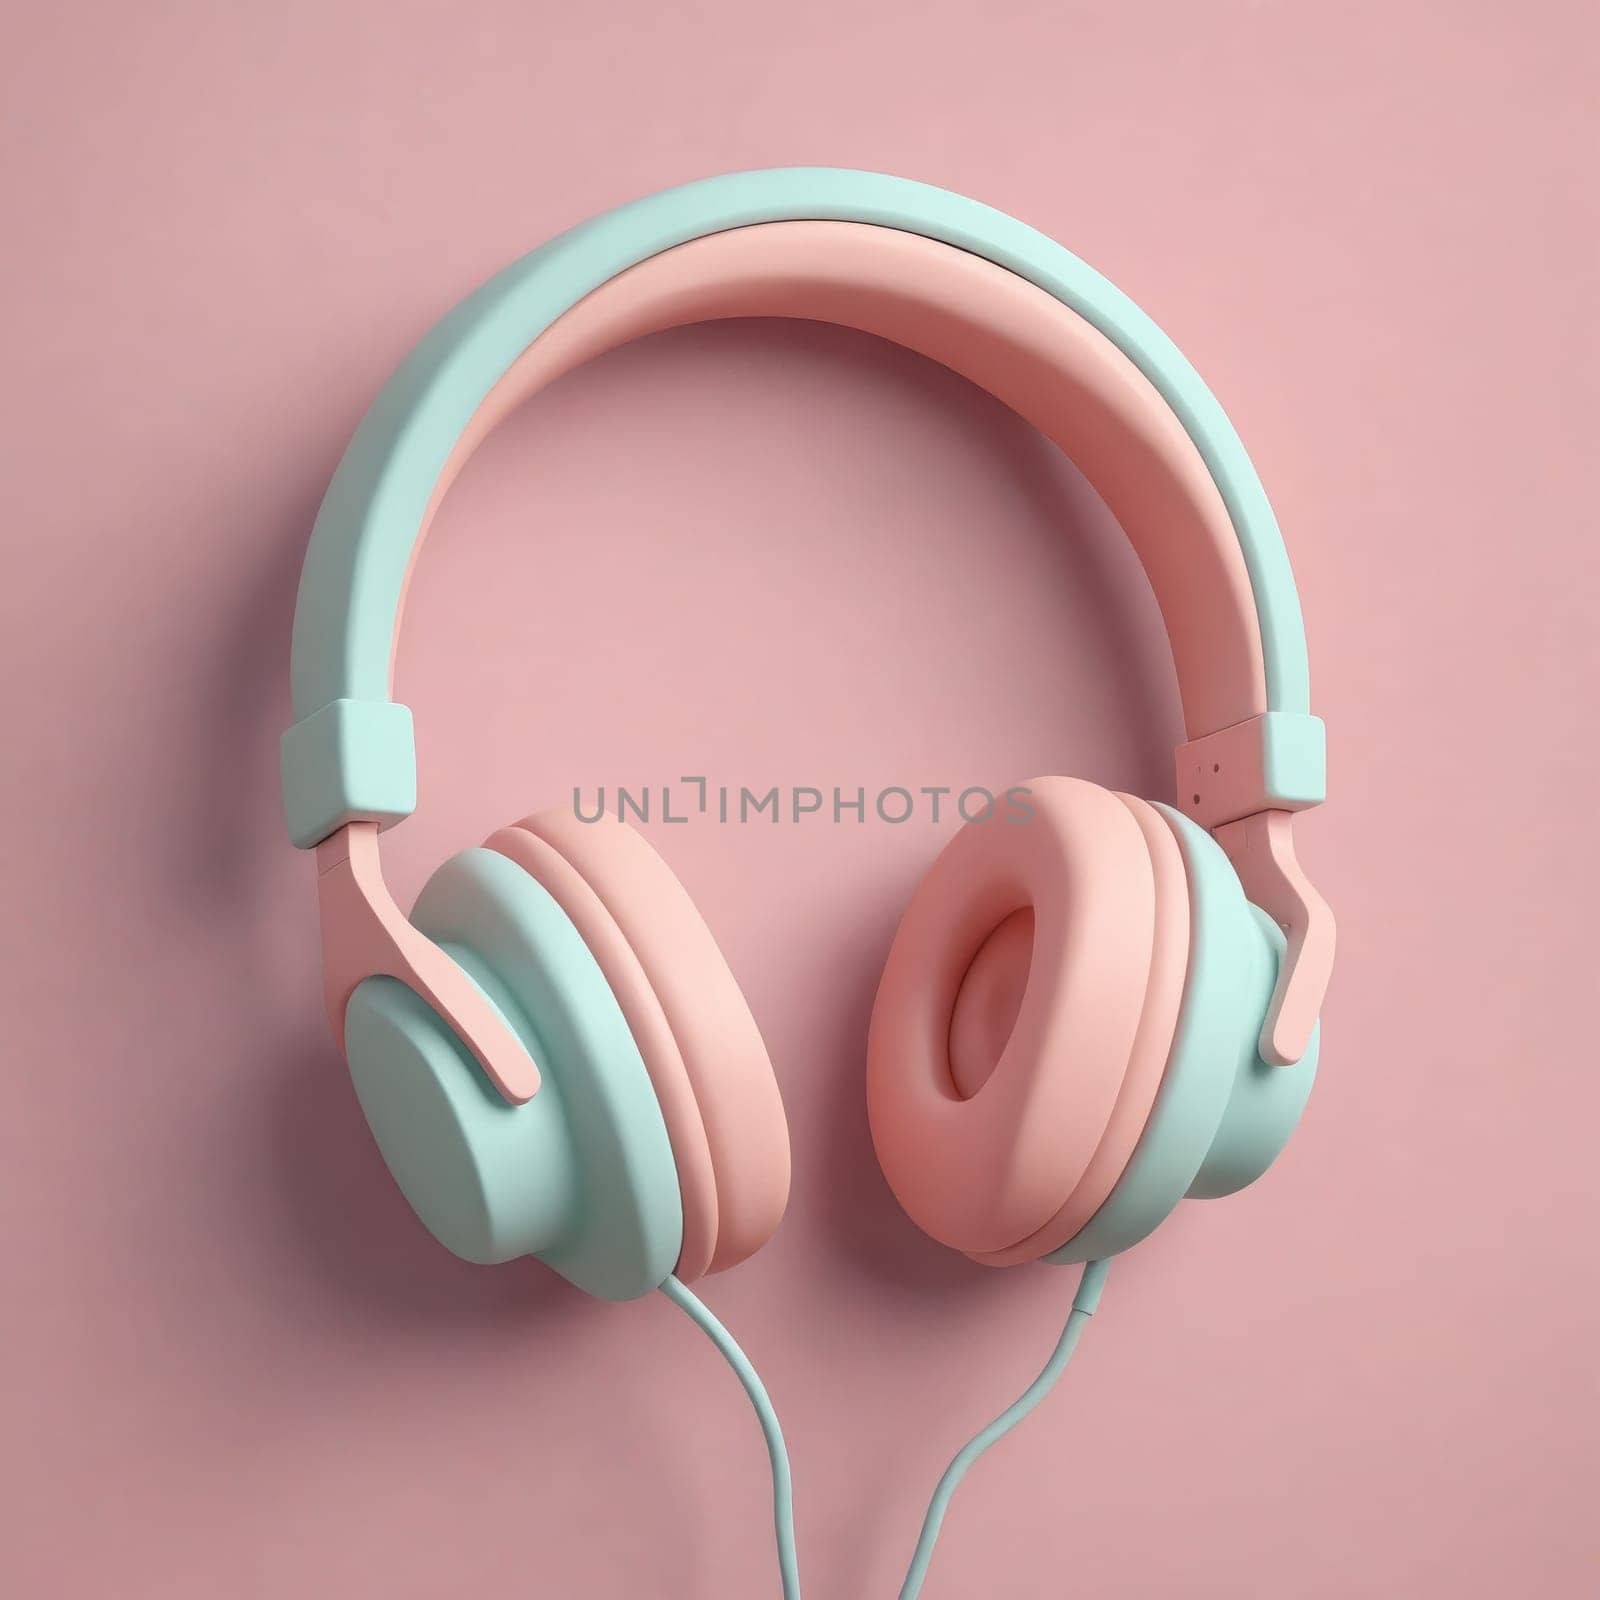 A pair of pink and blue headphones, a peripheral and output device, rest on a pink background. The earphones are a stylish audio equipment gadget with a magenta font. The headphones are made of wood